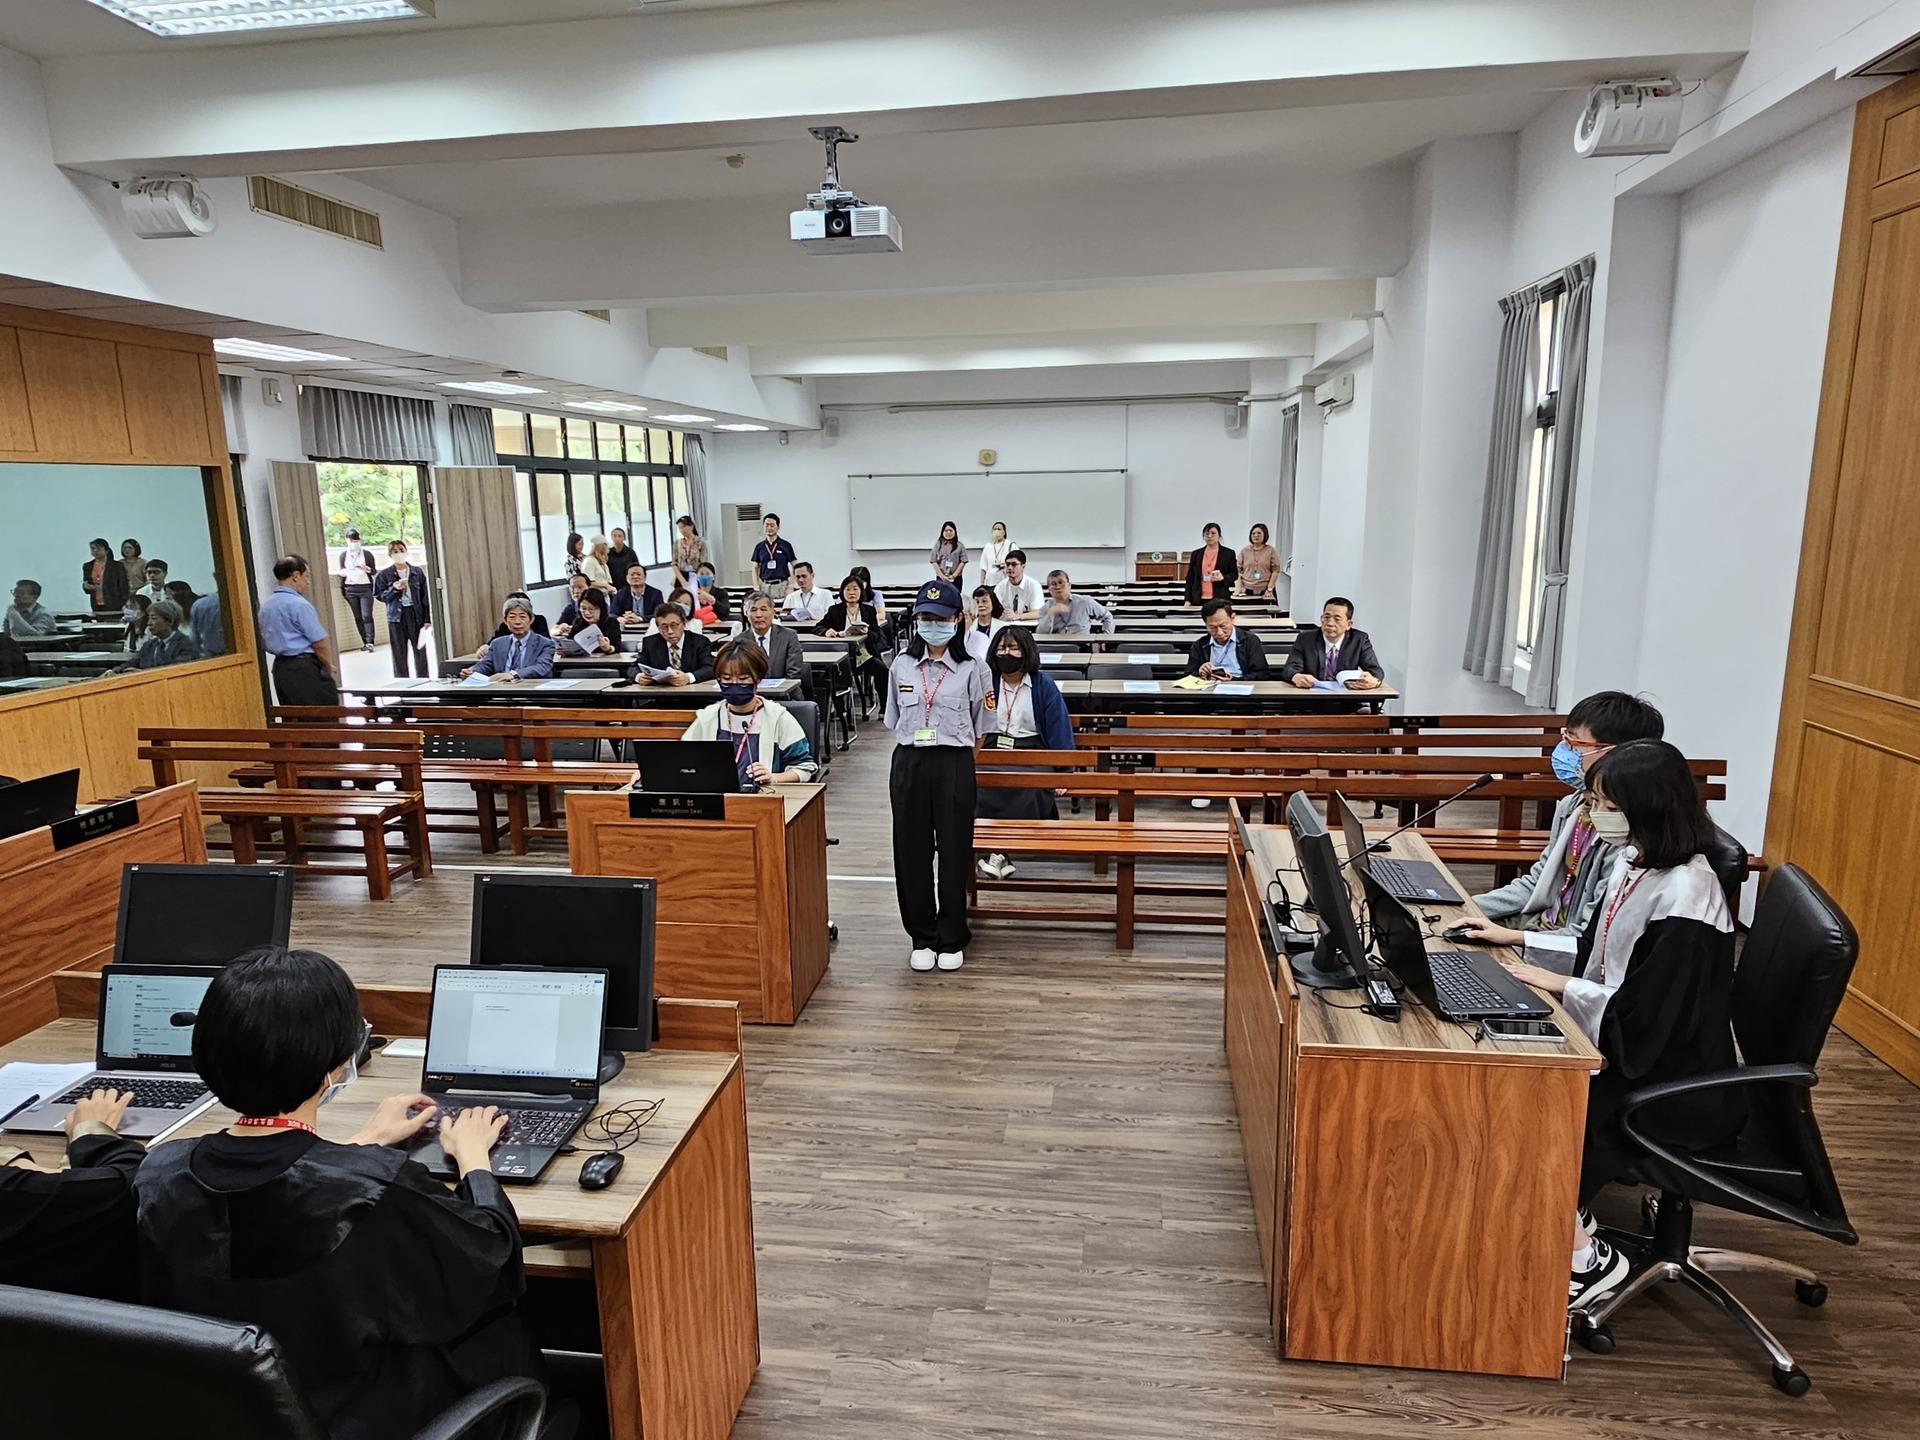 At the Open Day, there will be an opportunity to experience the moot court at the College of Law.